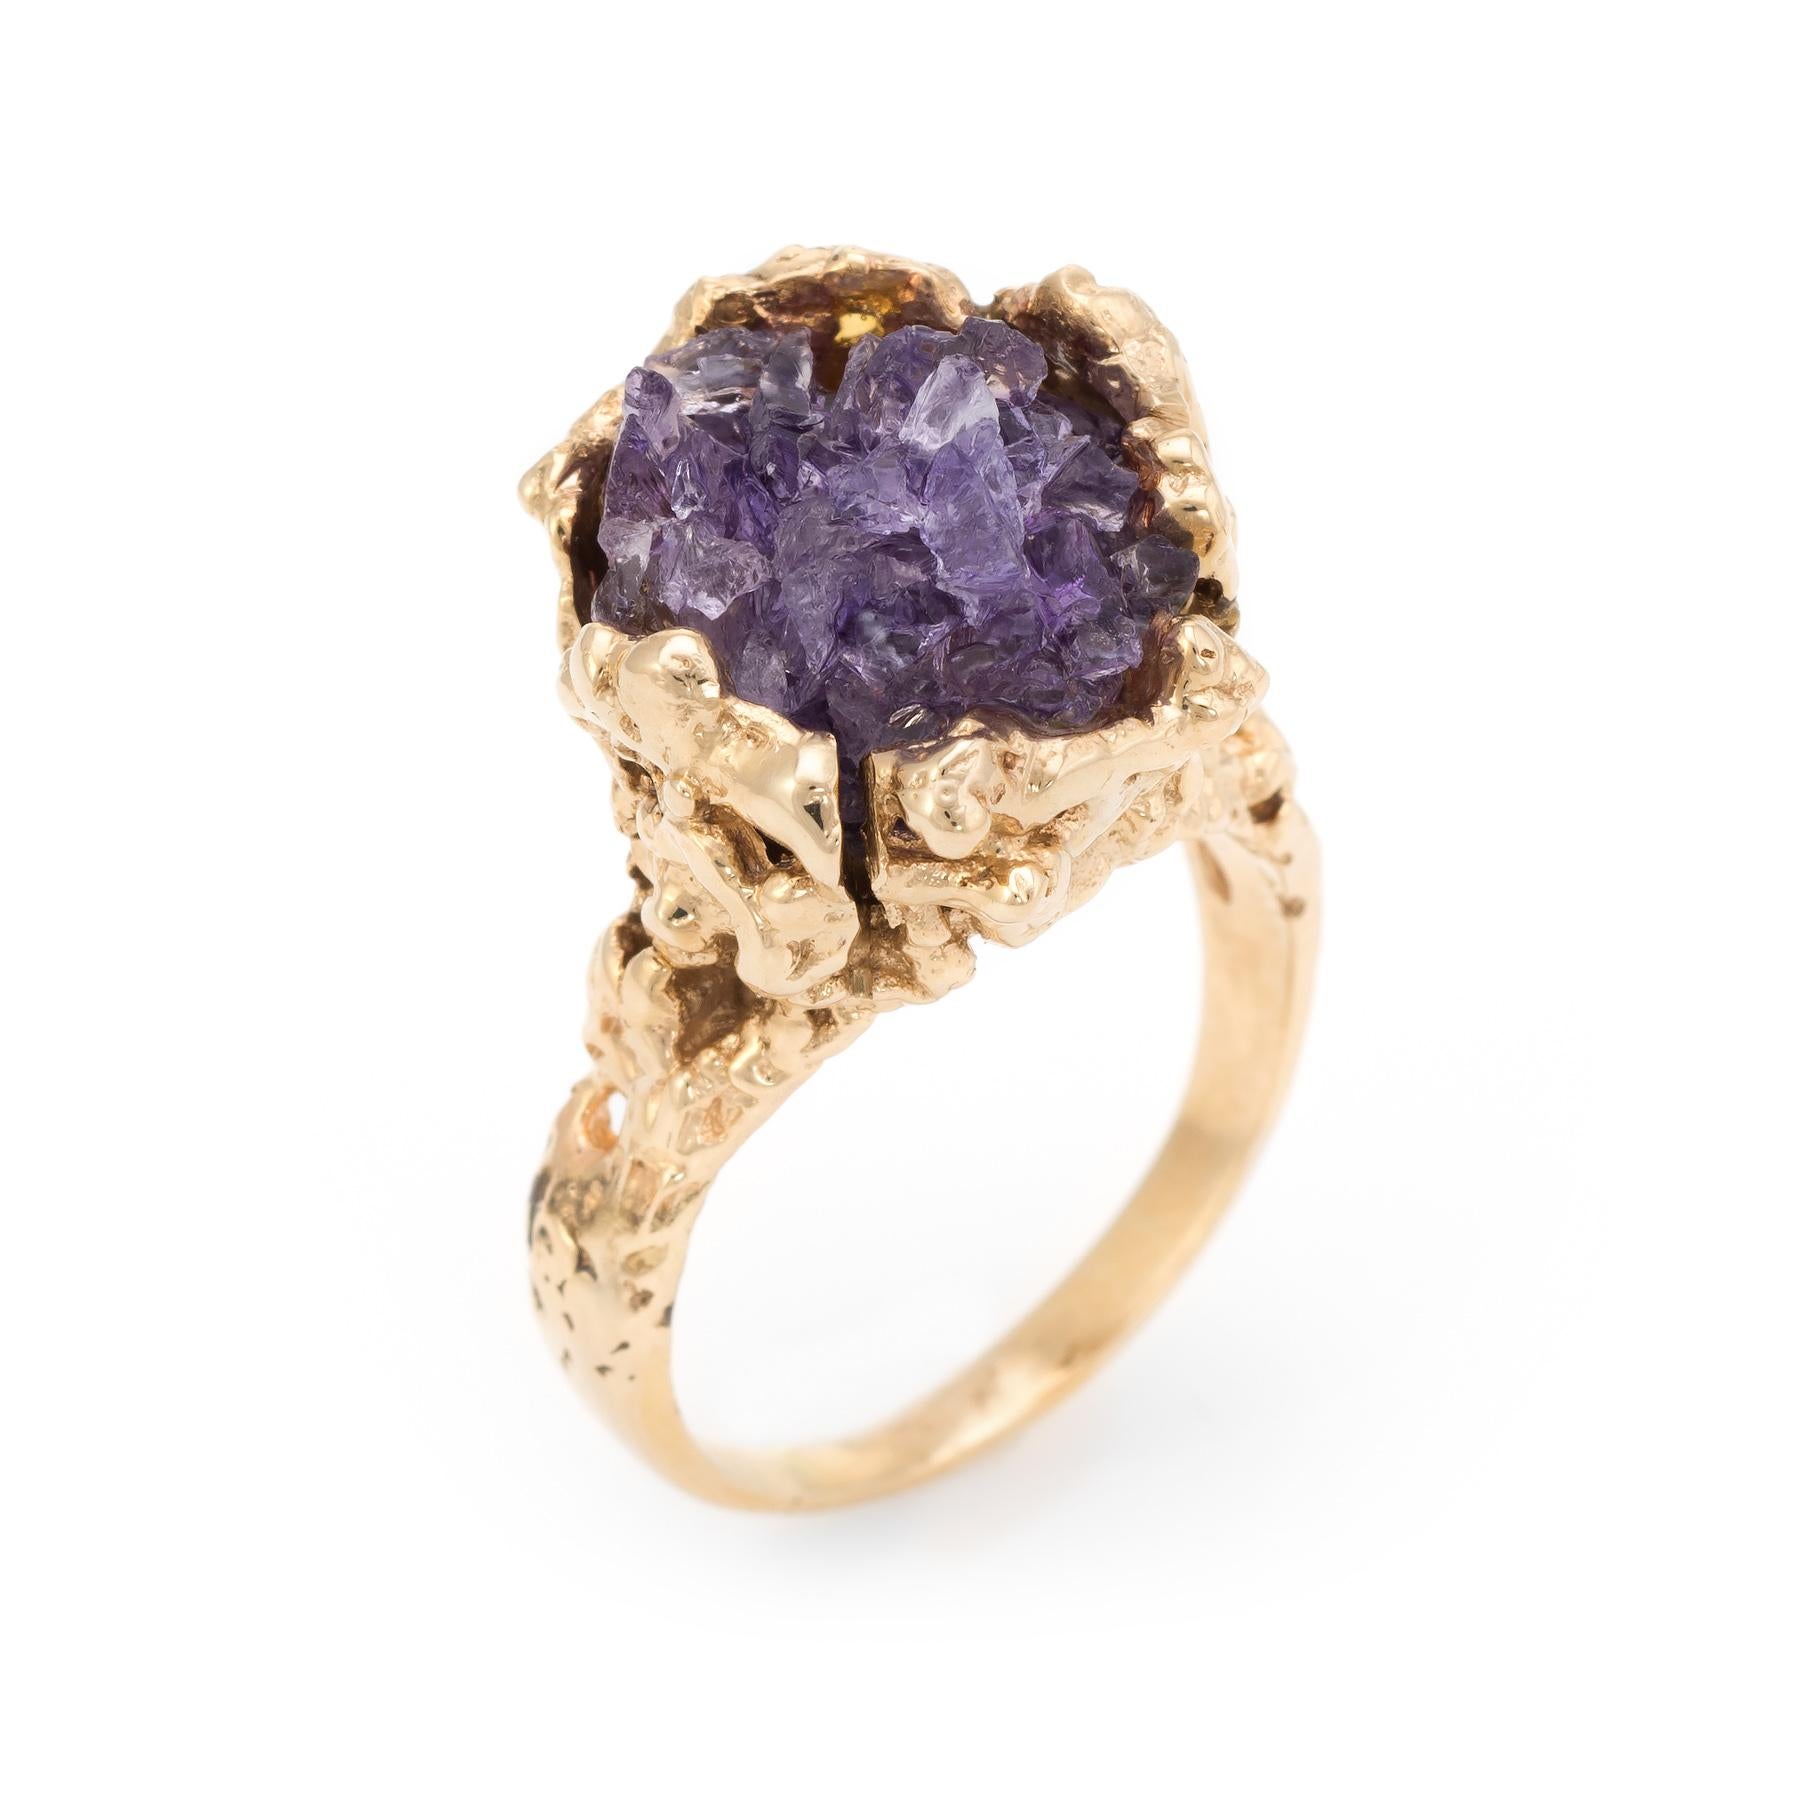 Distinct and unusual vintage nugget cocktail ring (circa 1960s to 1970s), crafted in 14 karat yellow gold. 

An amethyst specimen in natural form measures 14mm x 12mm. The bold and rustic charm of the amethyst is perfectly complimented with the